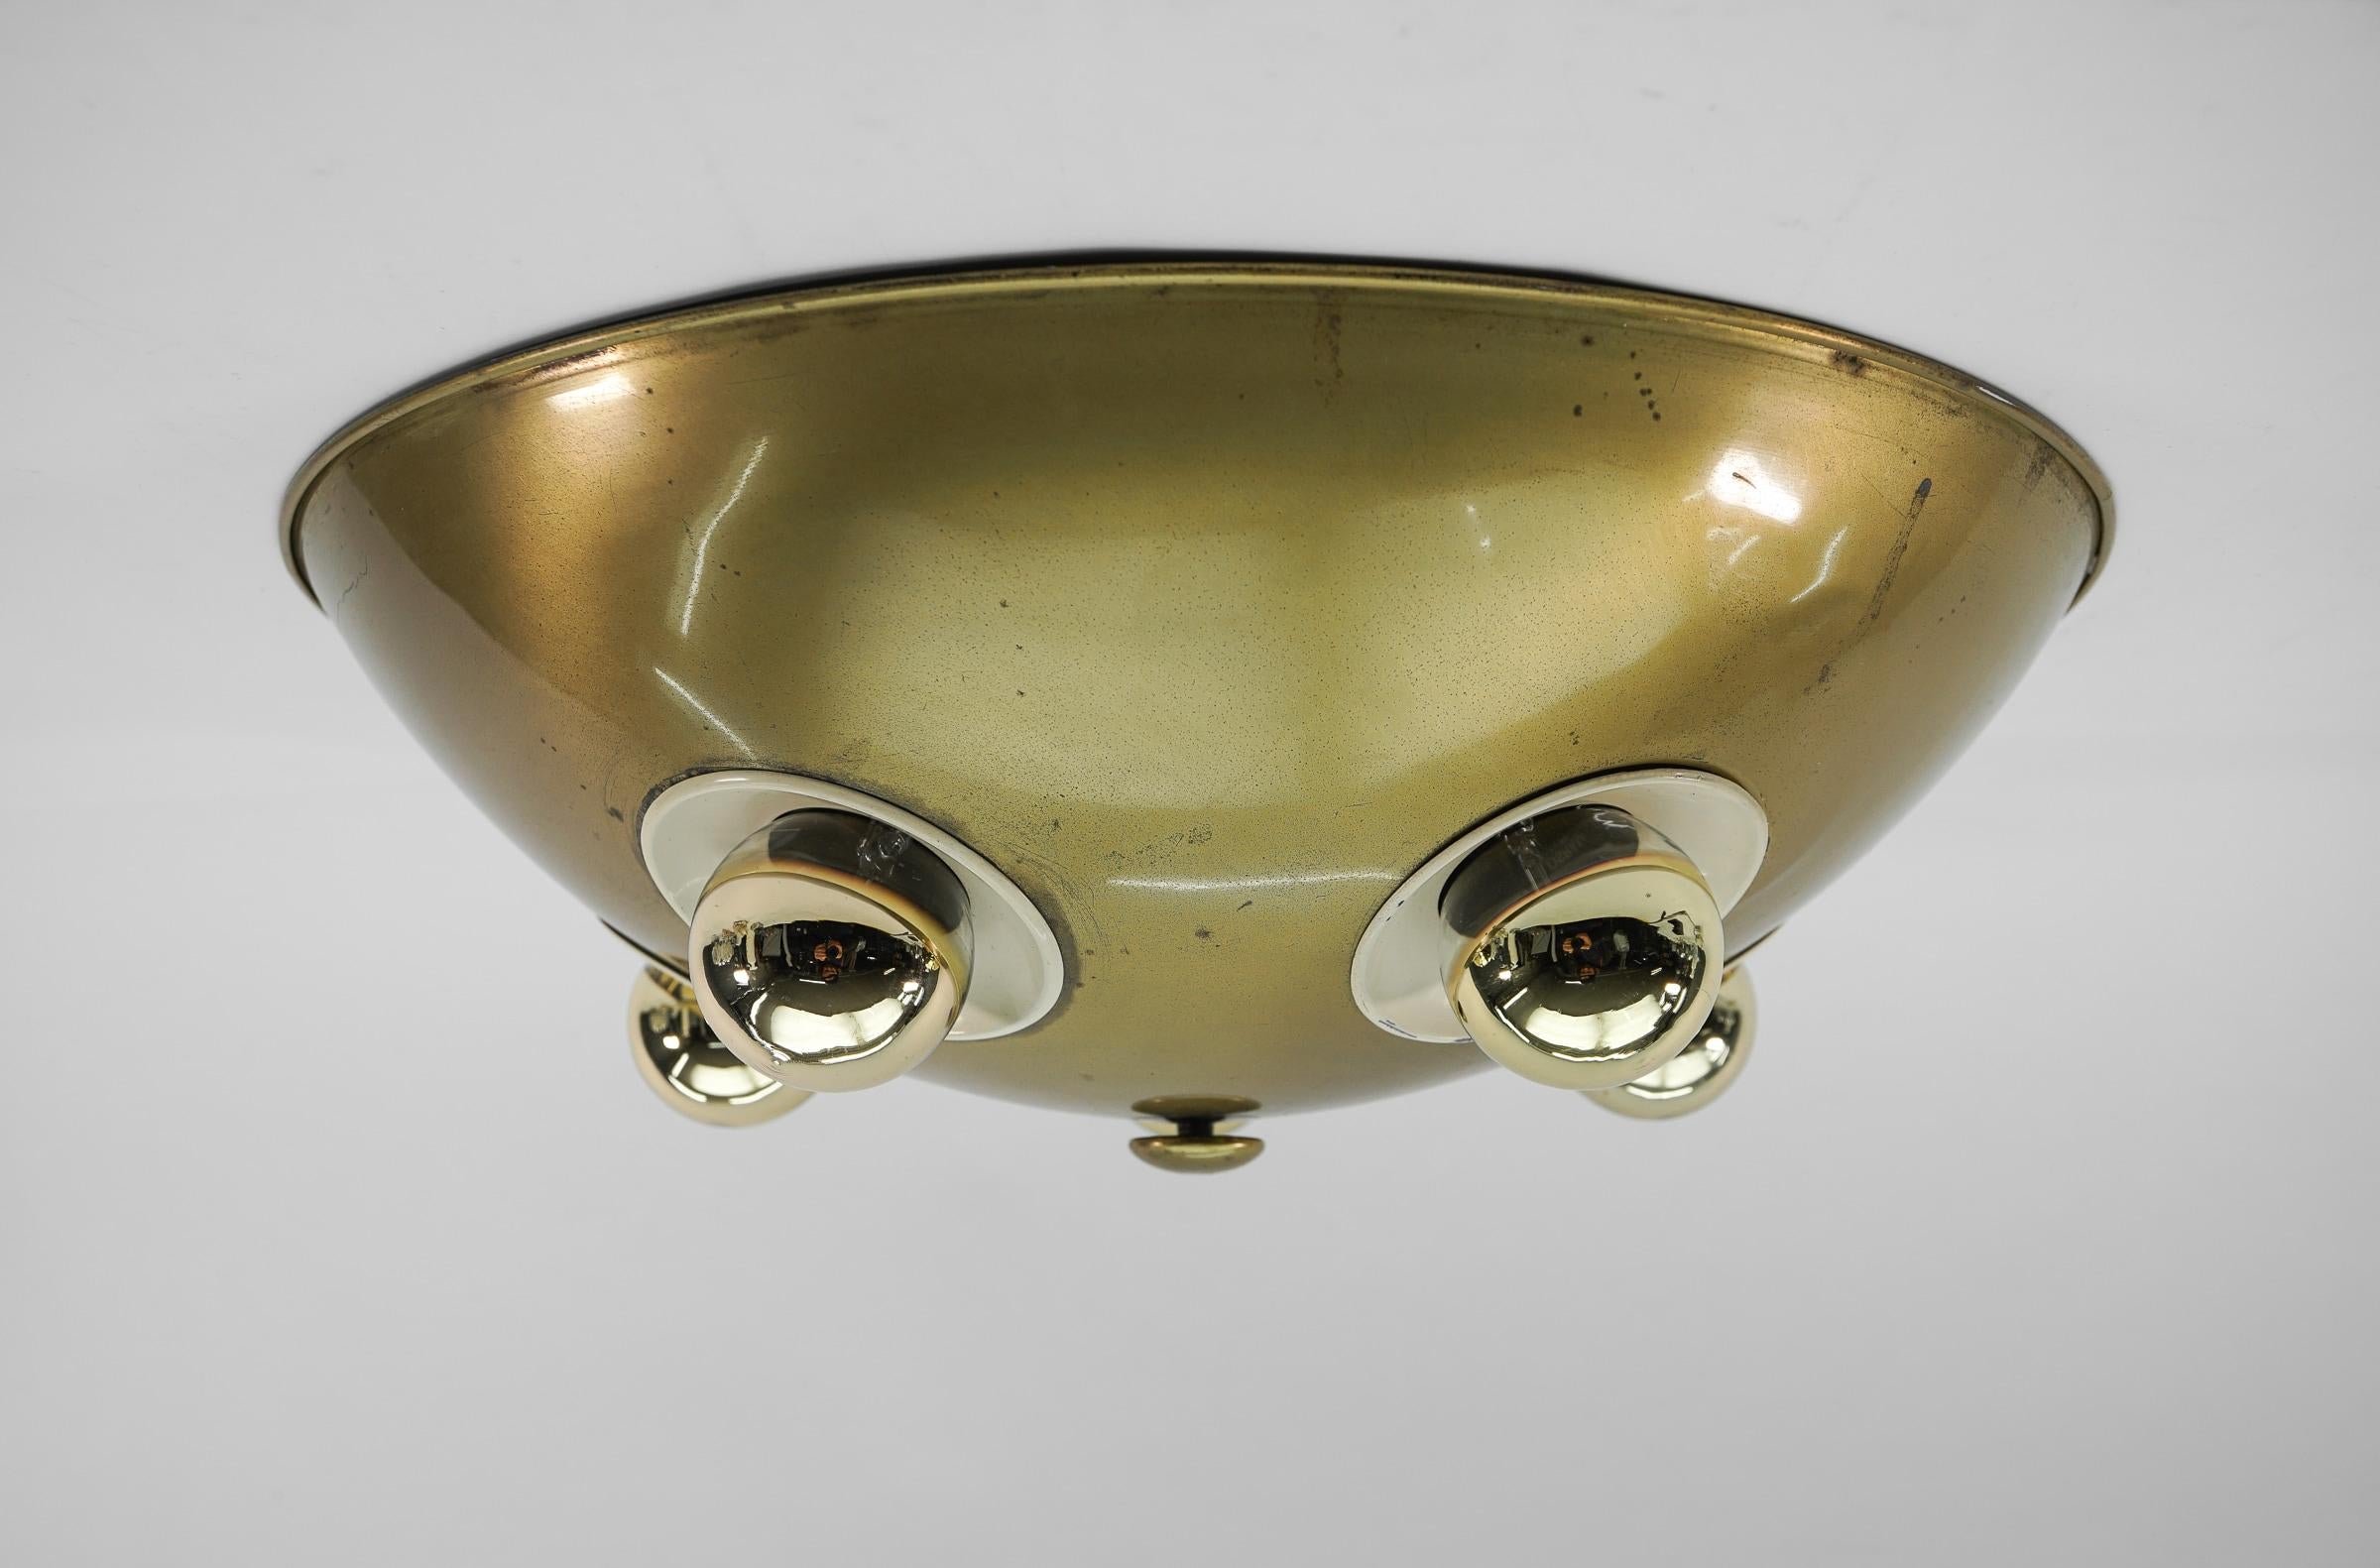 Executed in brass and metal. The lamp needs 5 x E127 / E26 Edison screw fit bulb is wired, in working condition and runs both on 110 / 230 volt. Dimmable.

Our lamps are checked, cleaned and are suitable for use in the USA.